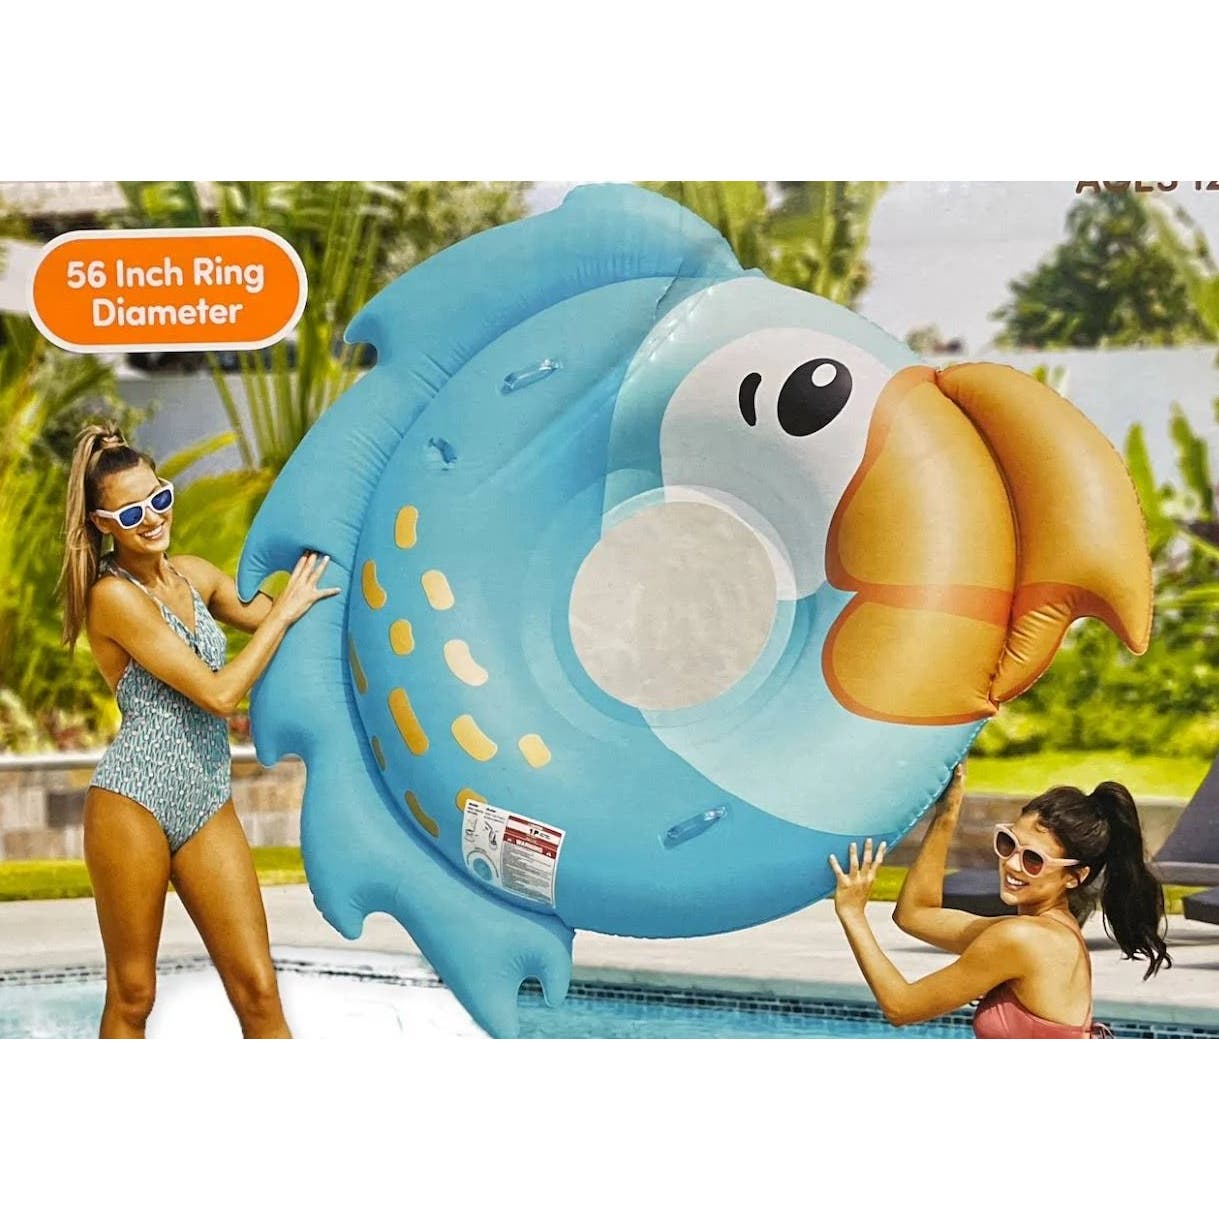 Giant 73"x65"x13.5" Inflatable Parrot Water Float w/ Side Handles, 200 lb. Limit